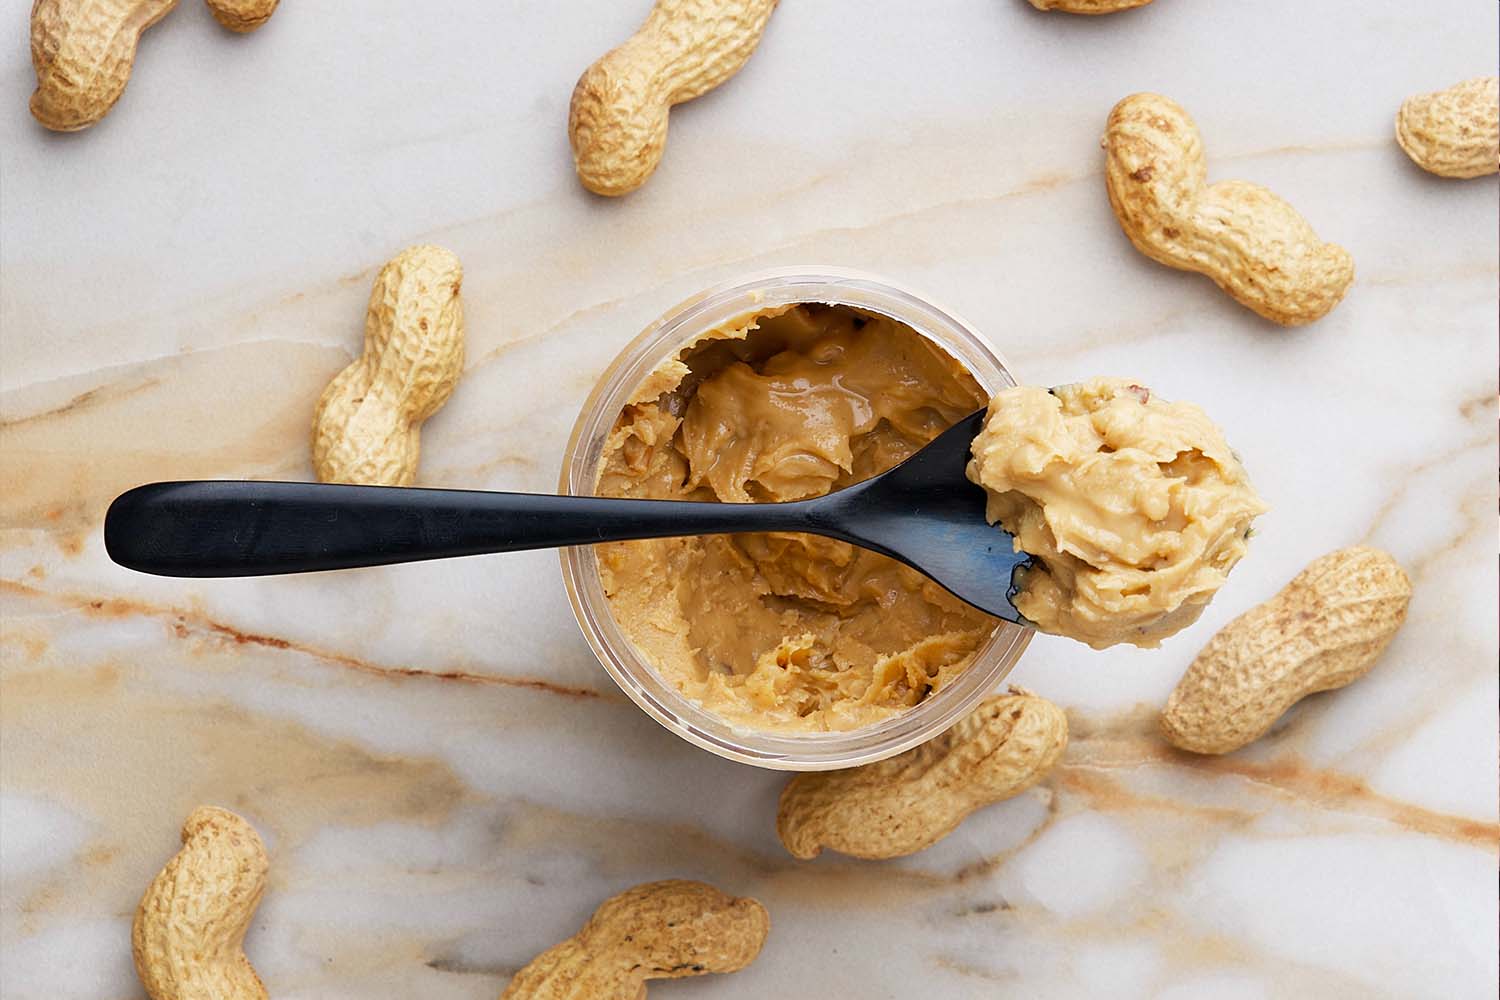 Peanut Butter Stirs an Old Debate: To the T.S.A., What's a Liquid? - The  New York Times